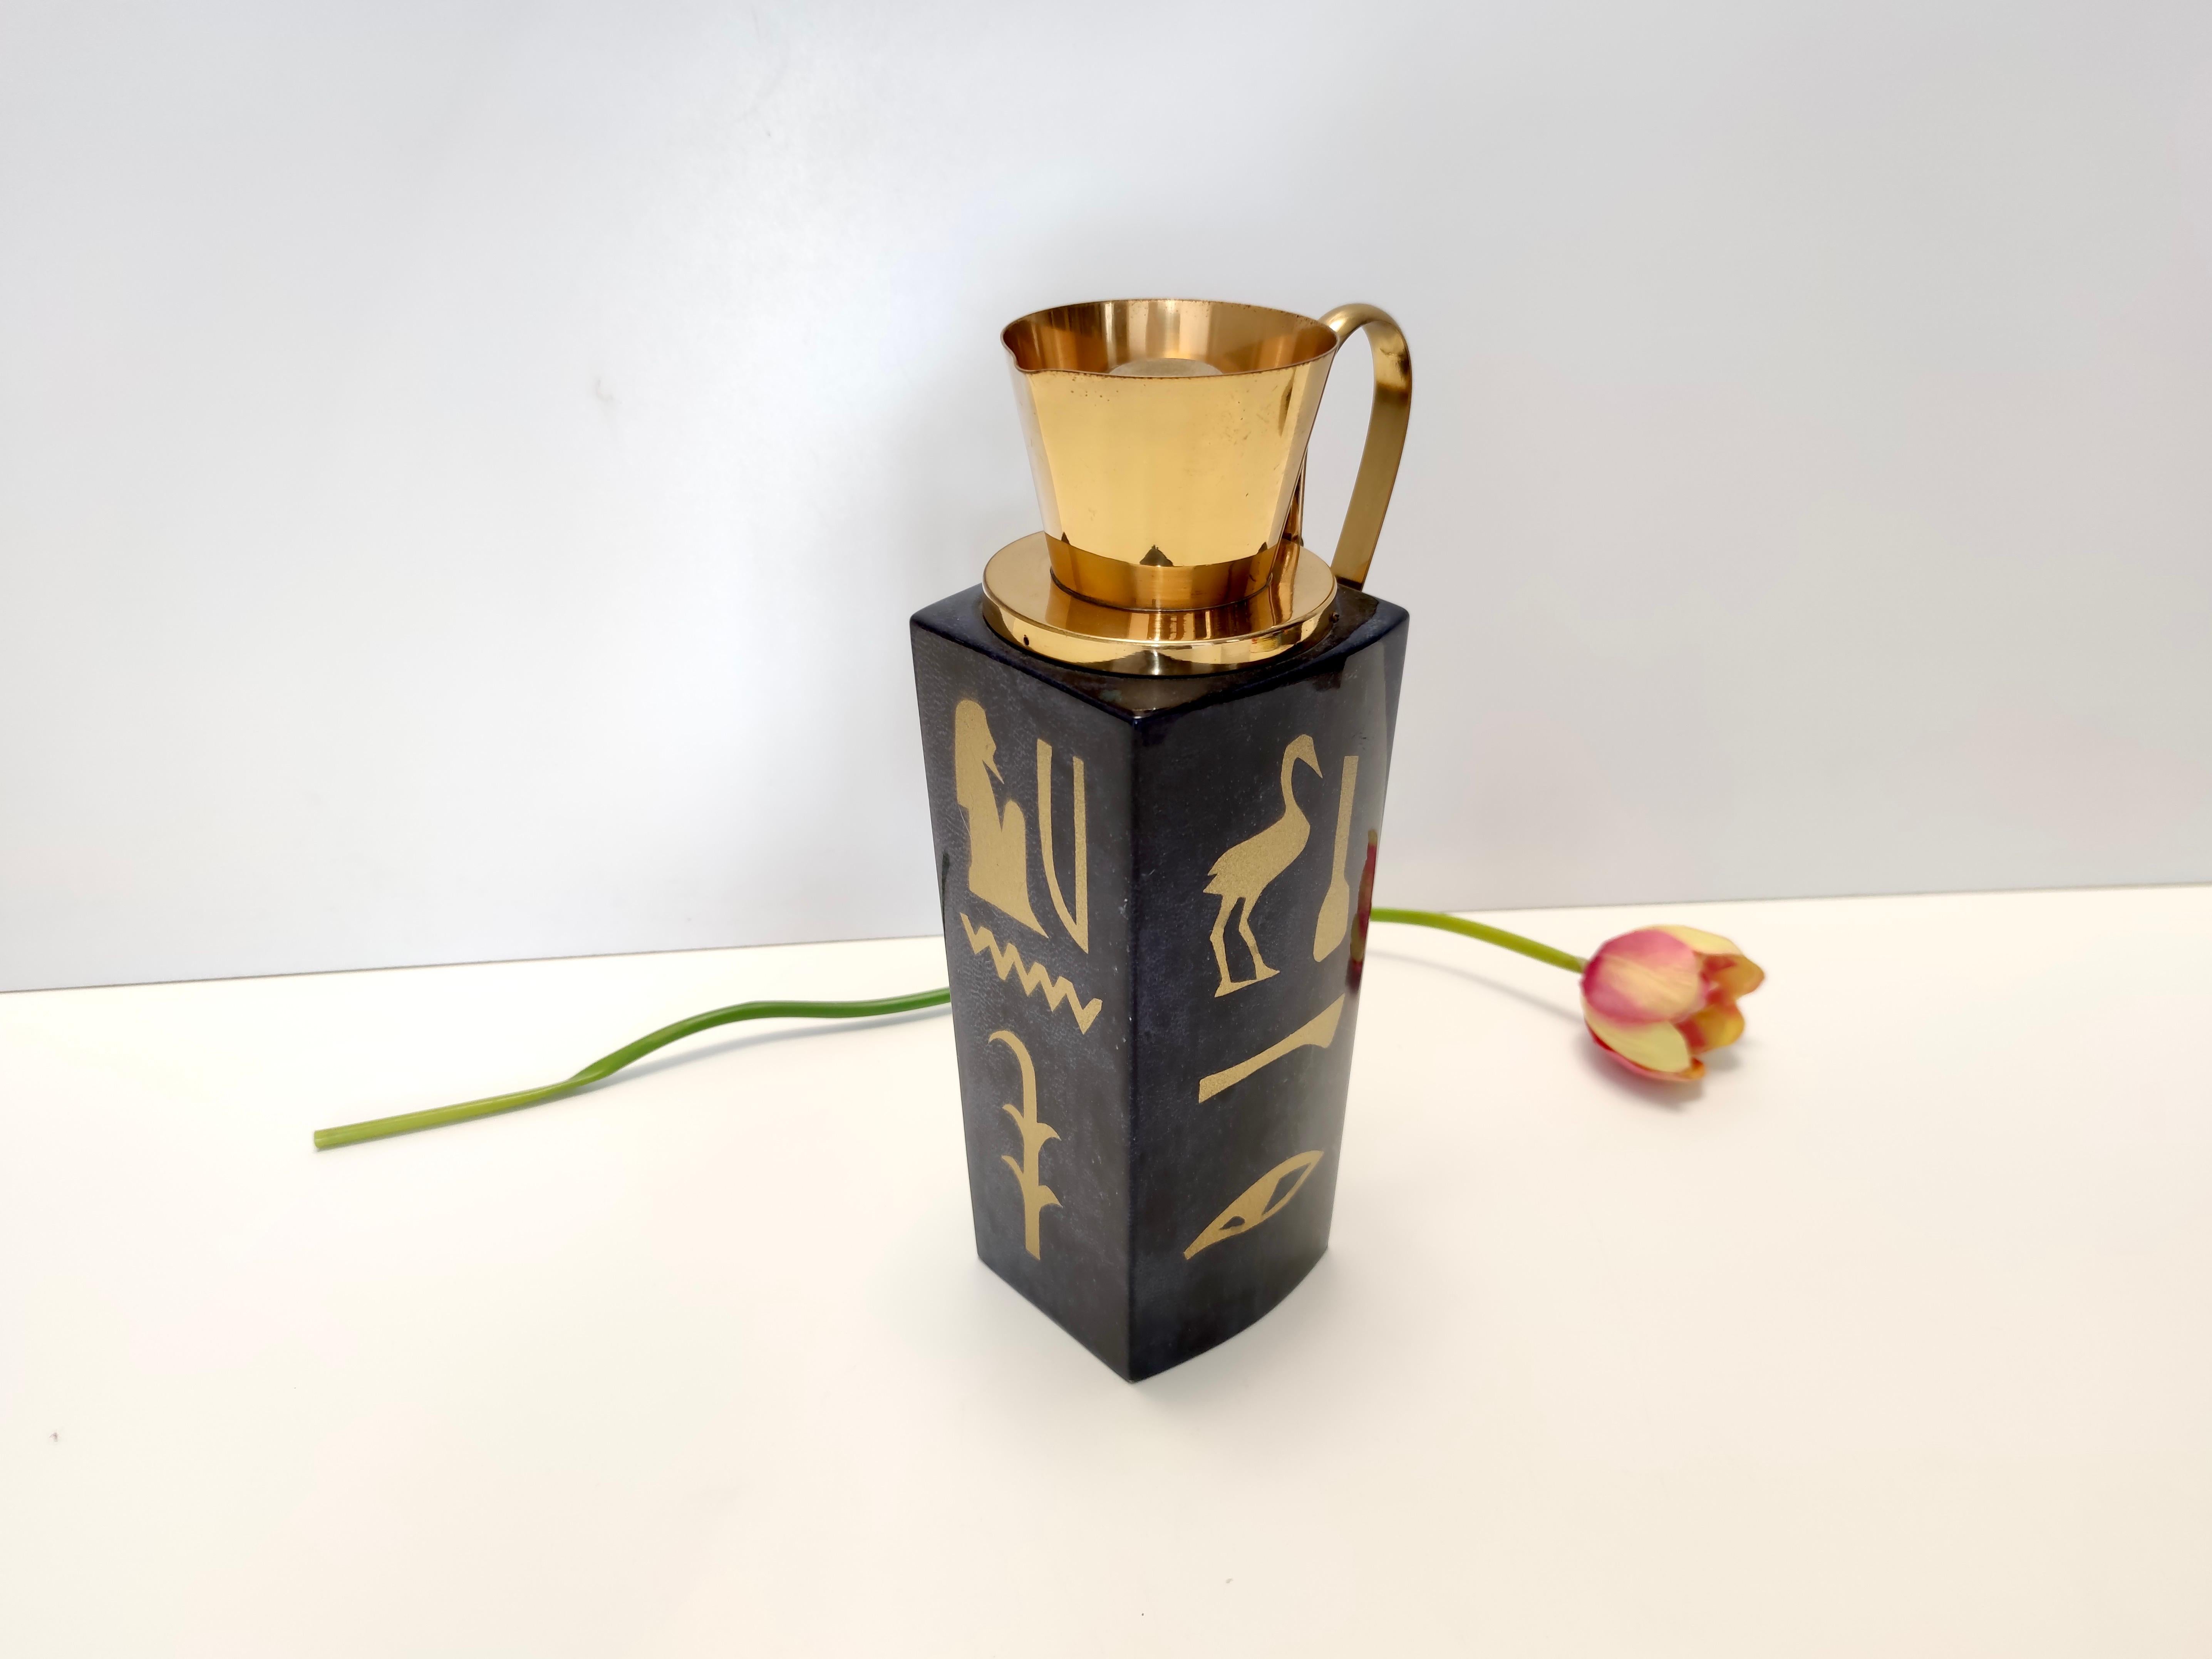 Made in Cusano Milanino, near Milan, Italy, in 1960s.
This thermos is made in painted parchment, brass, beech and glass.
It is a vintage piece, therefore it might show slight traces of use, but it can be considered as in perfect original condition.